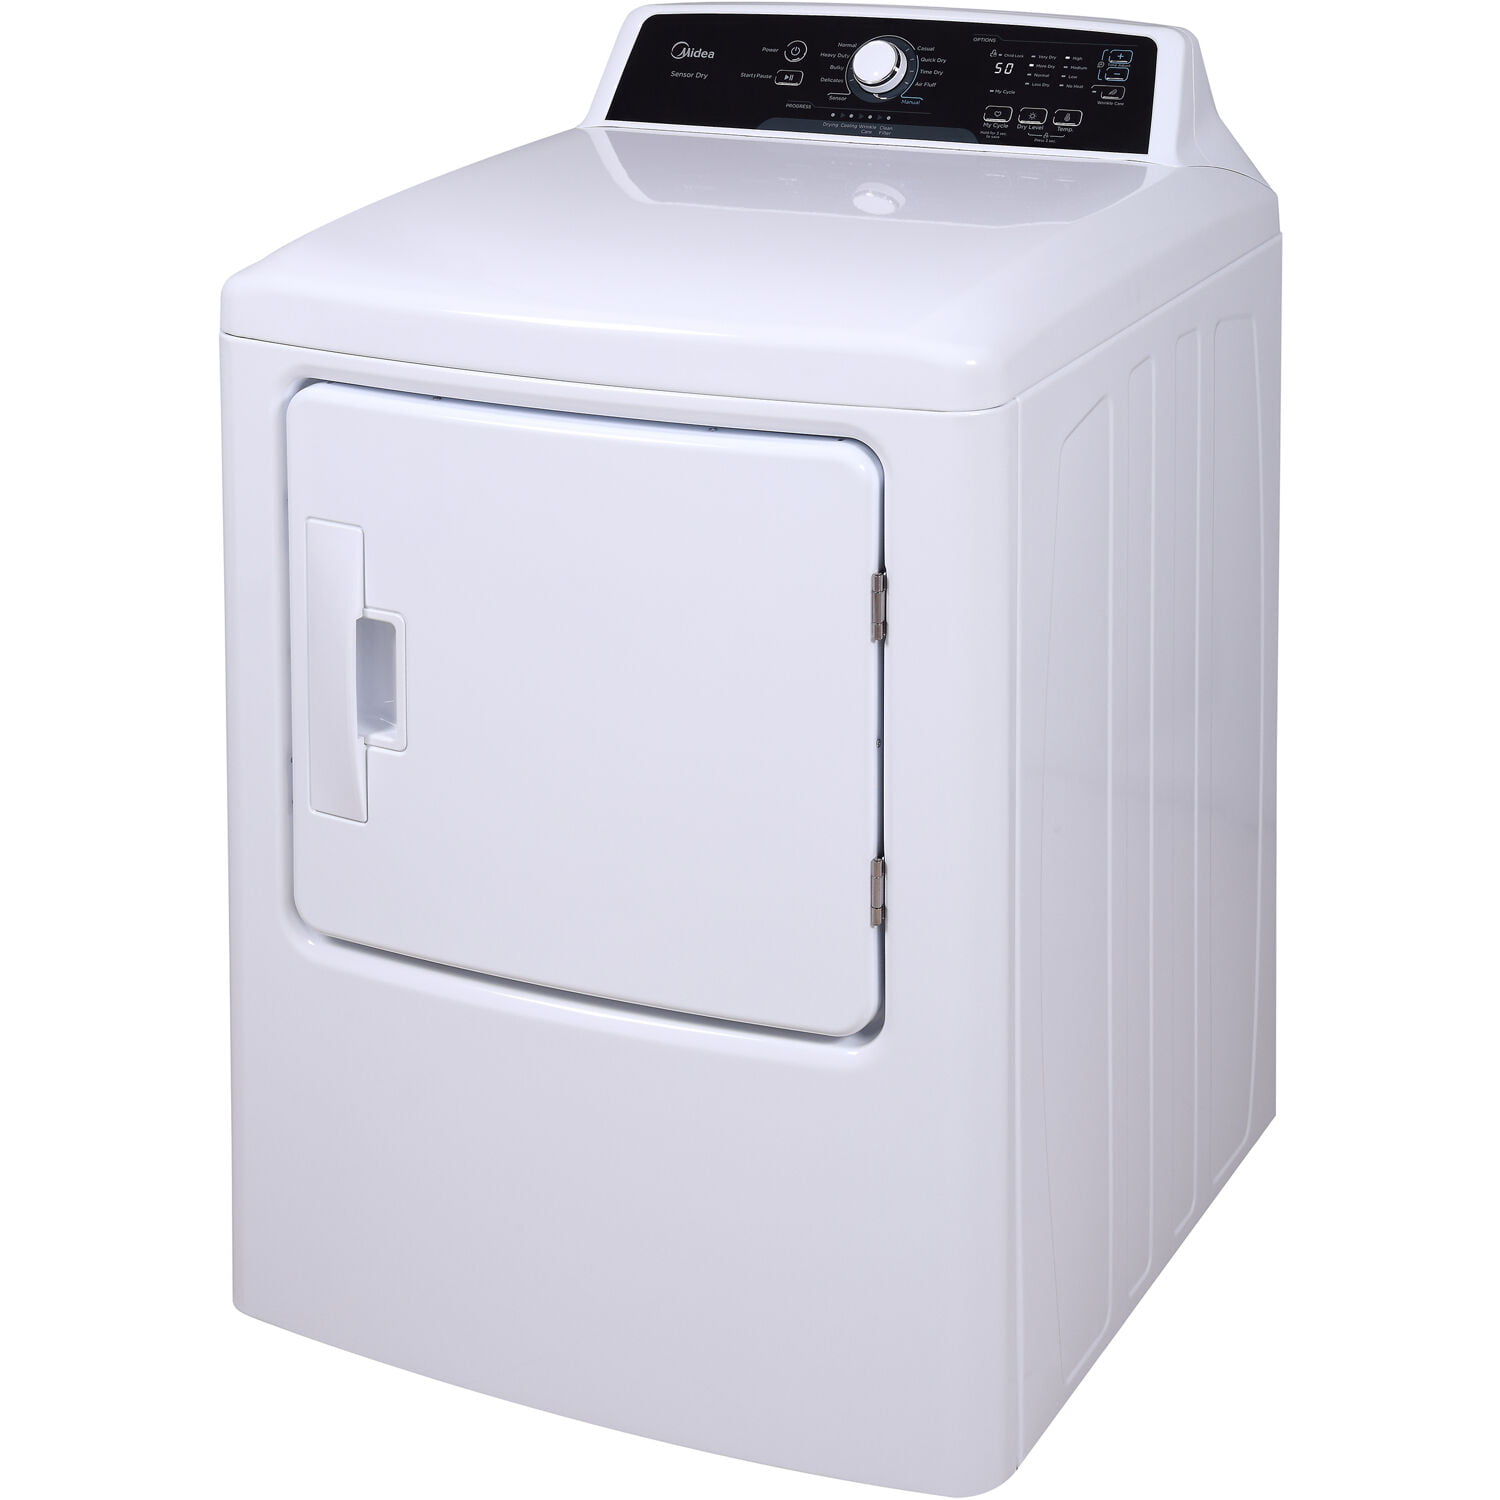 Portable Clothes Dryer Multifunctional Drier Machine with Timer